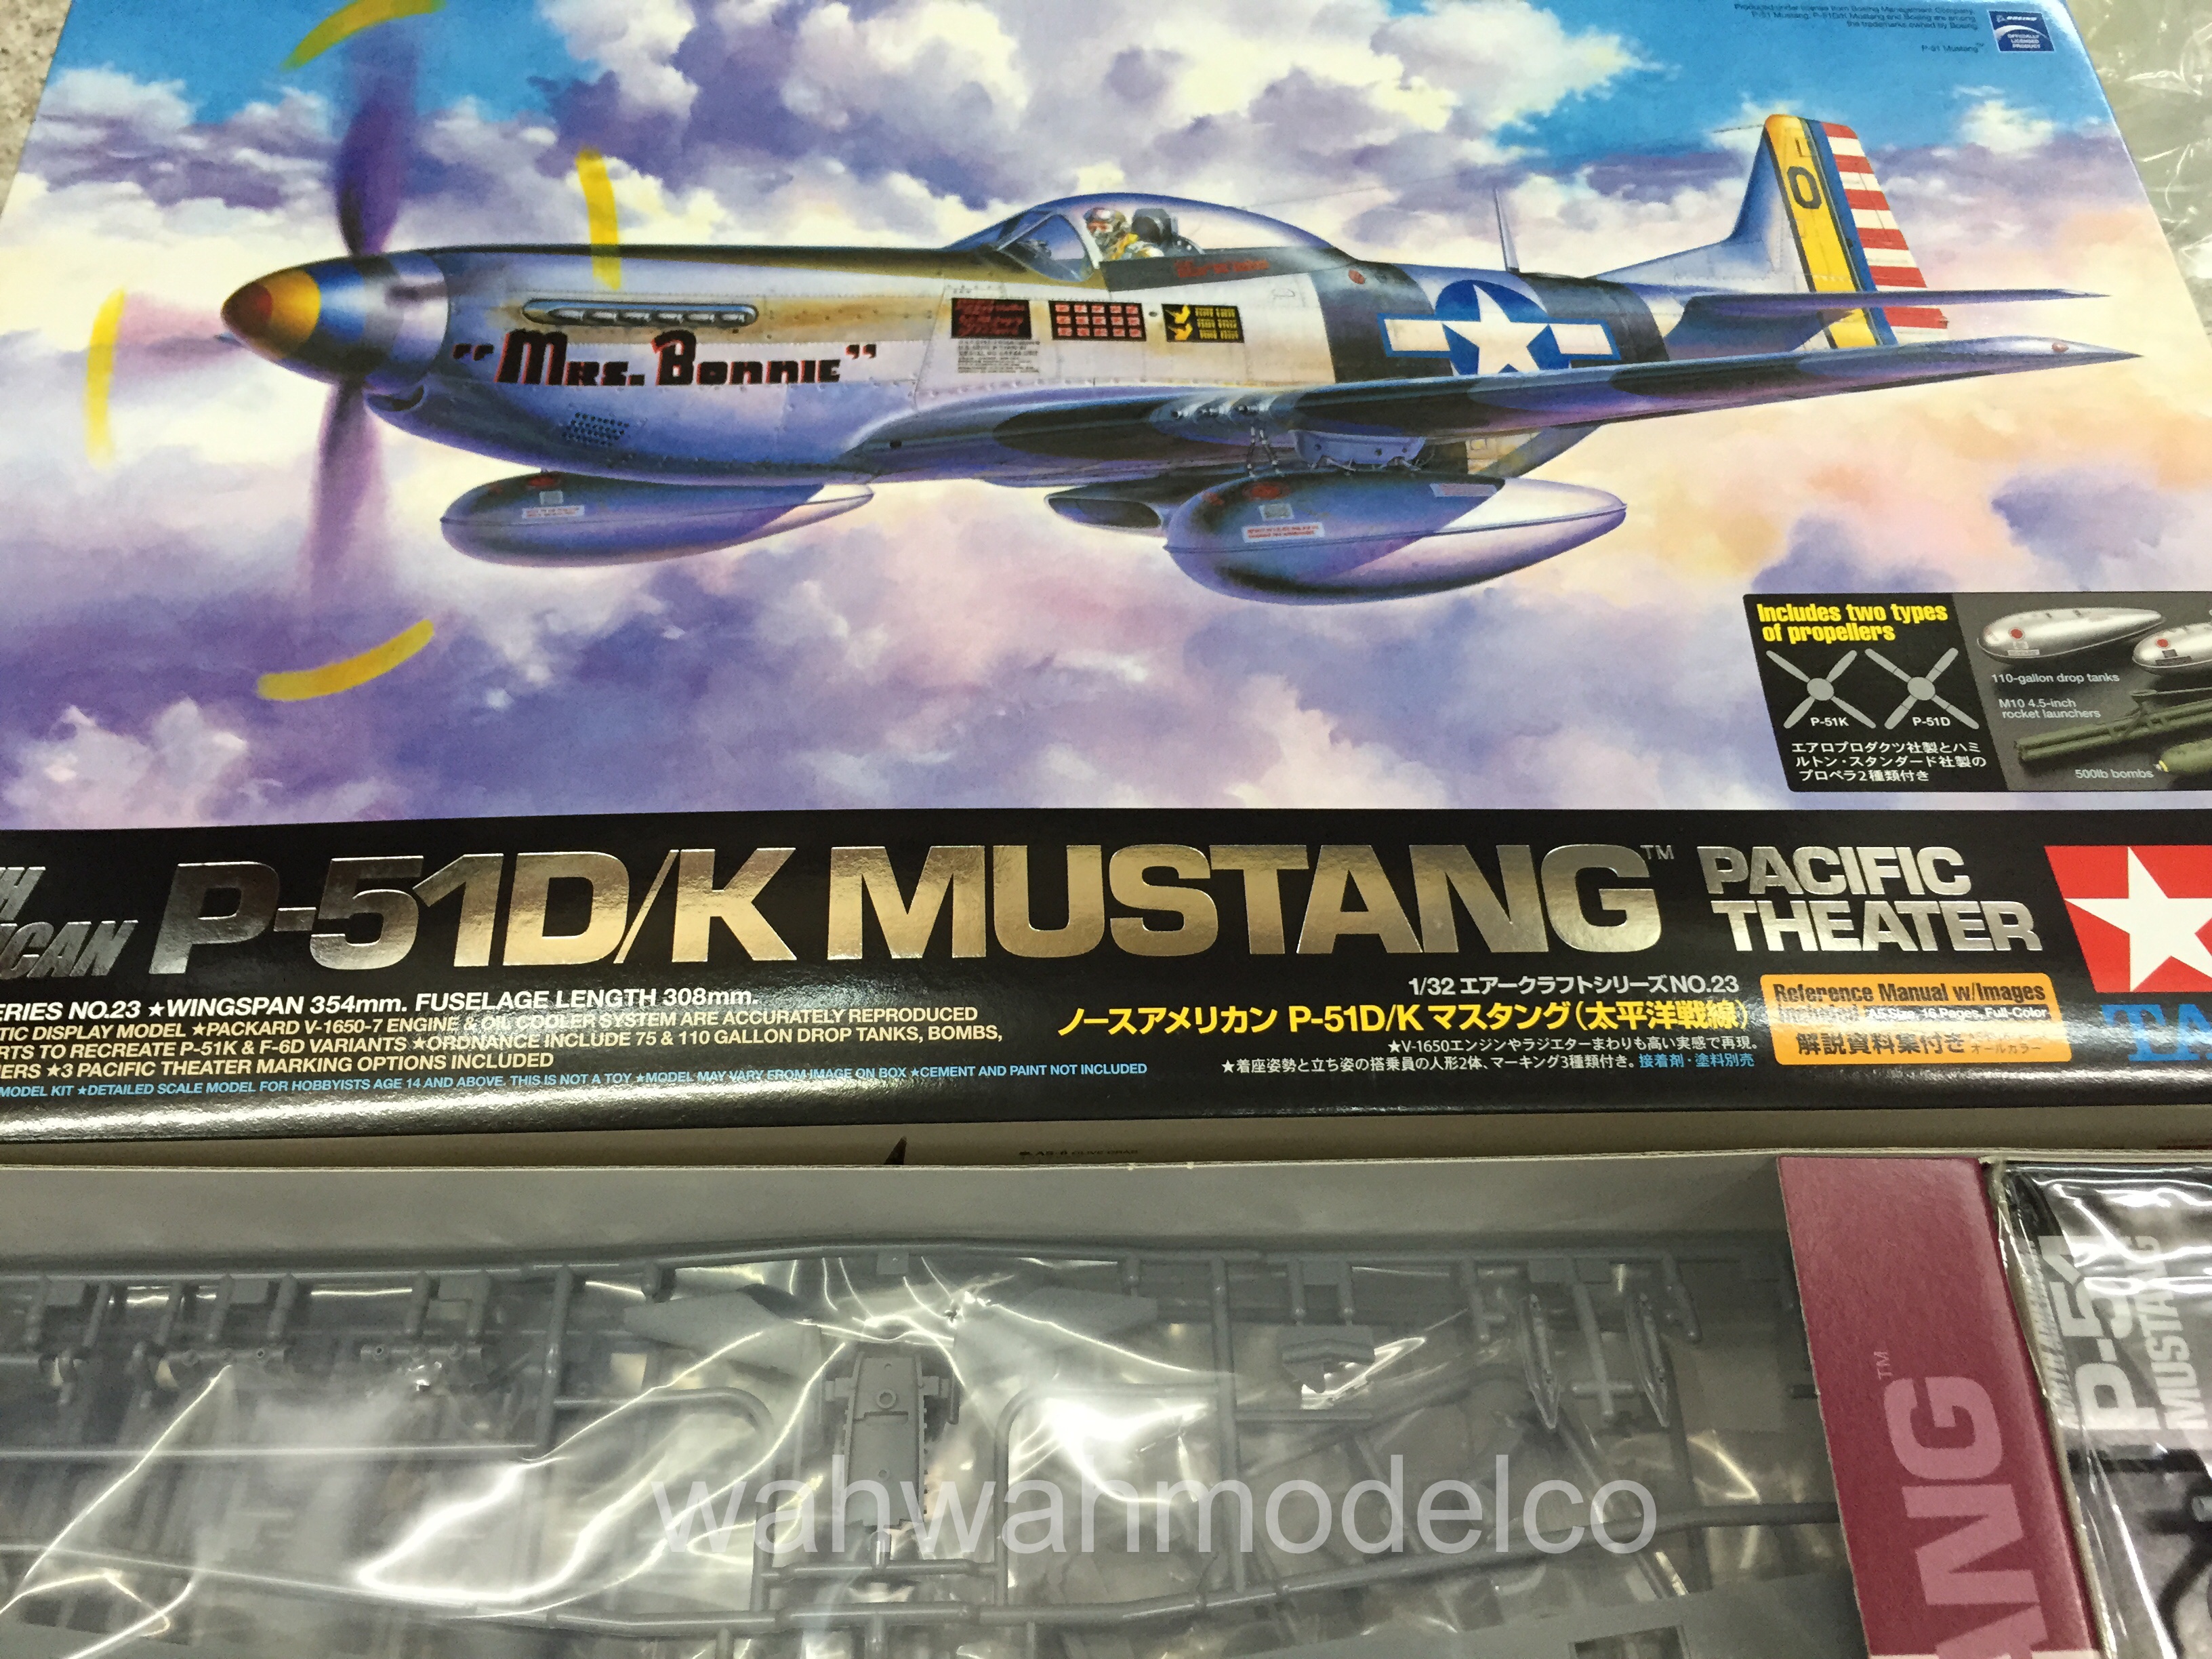 Tamiya 1/32 North American P-51d/k Mustang Pacific Theater 60323 Japan for sale online 